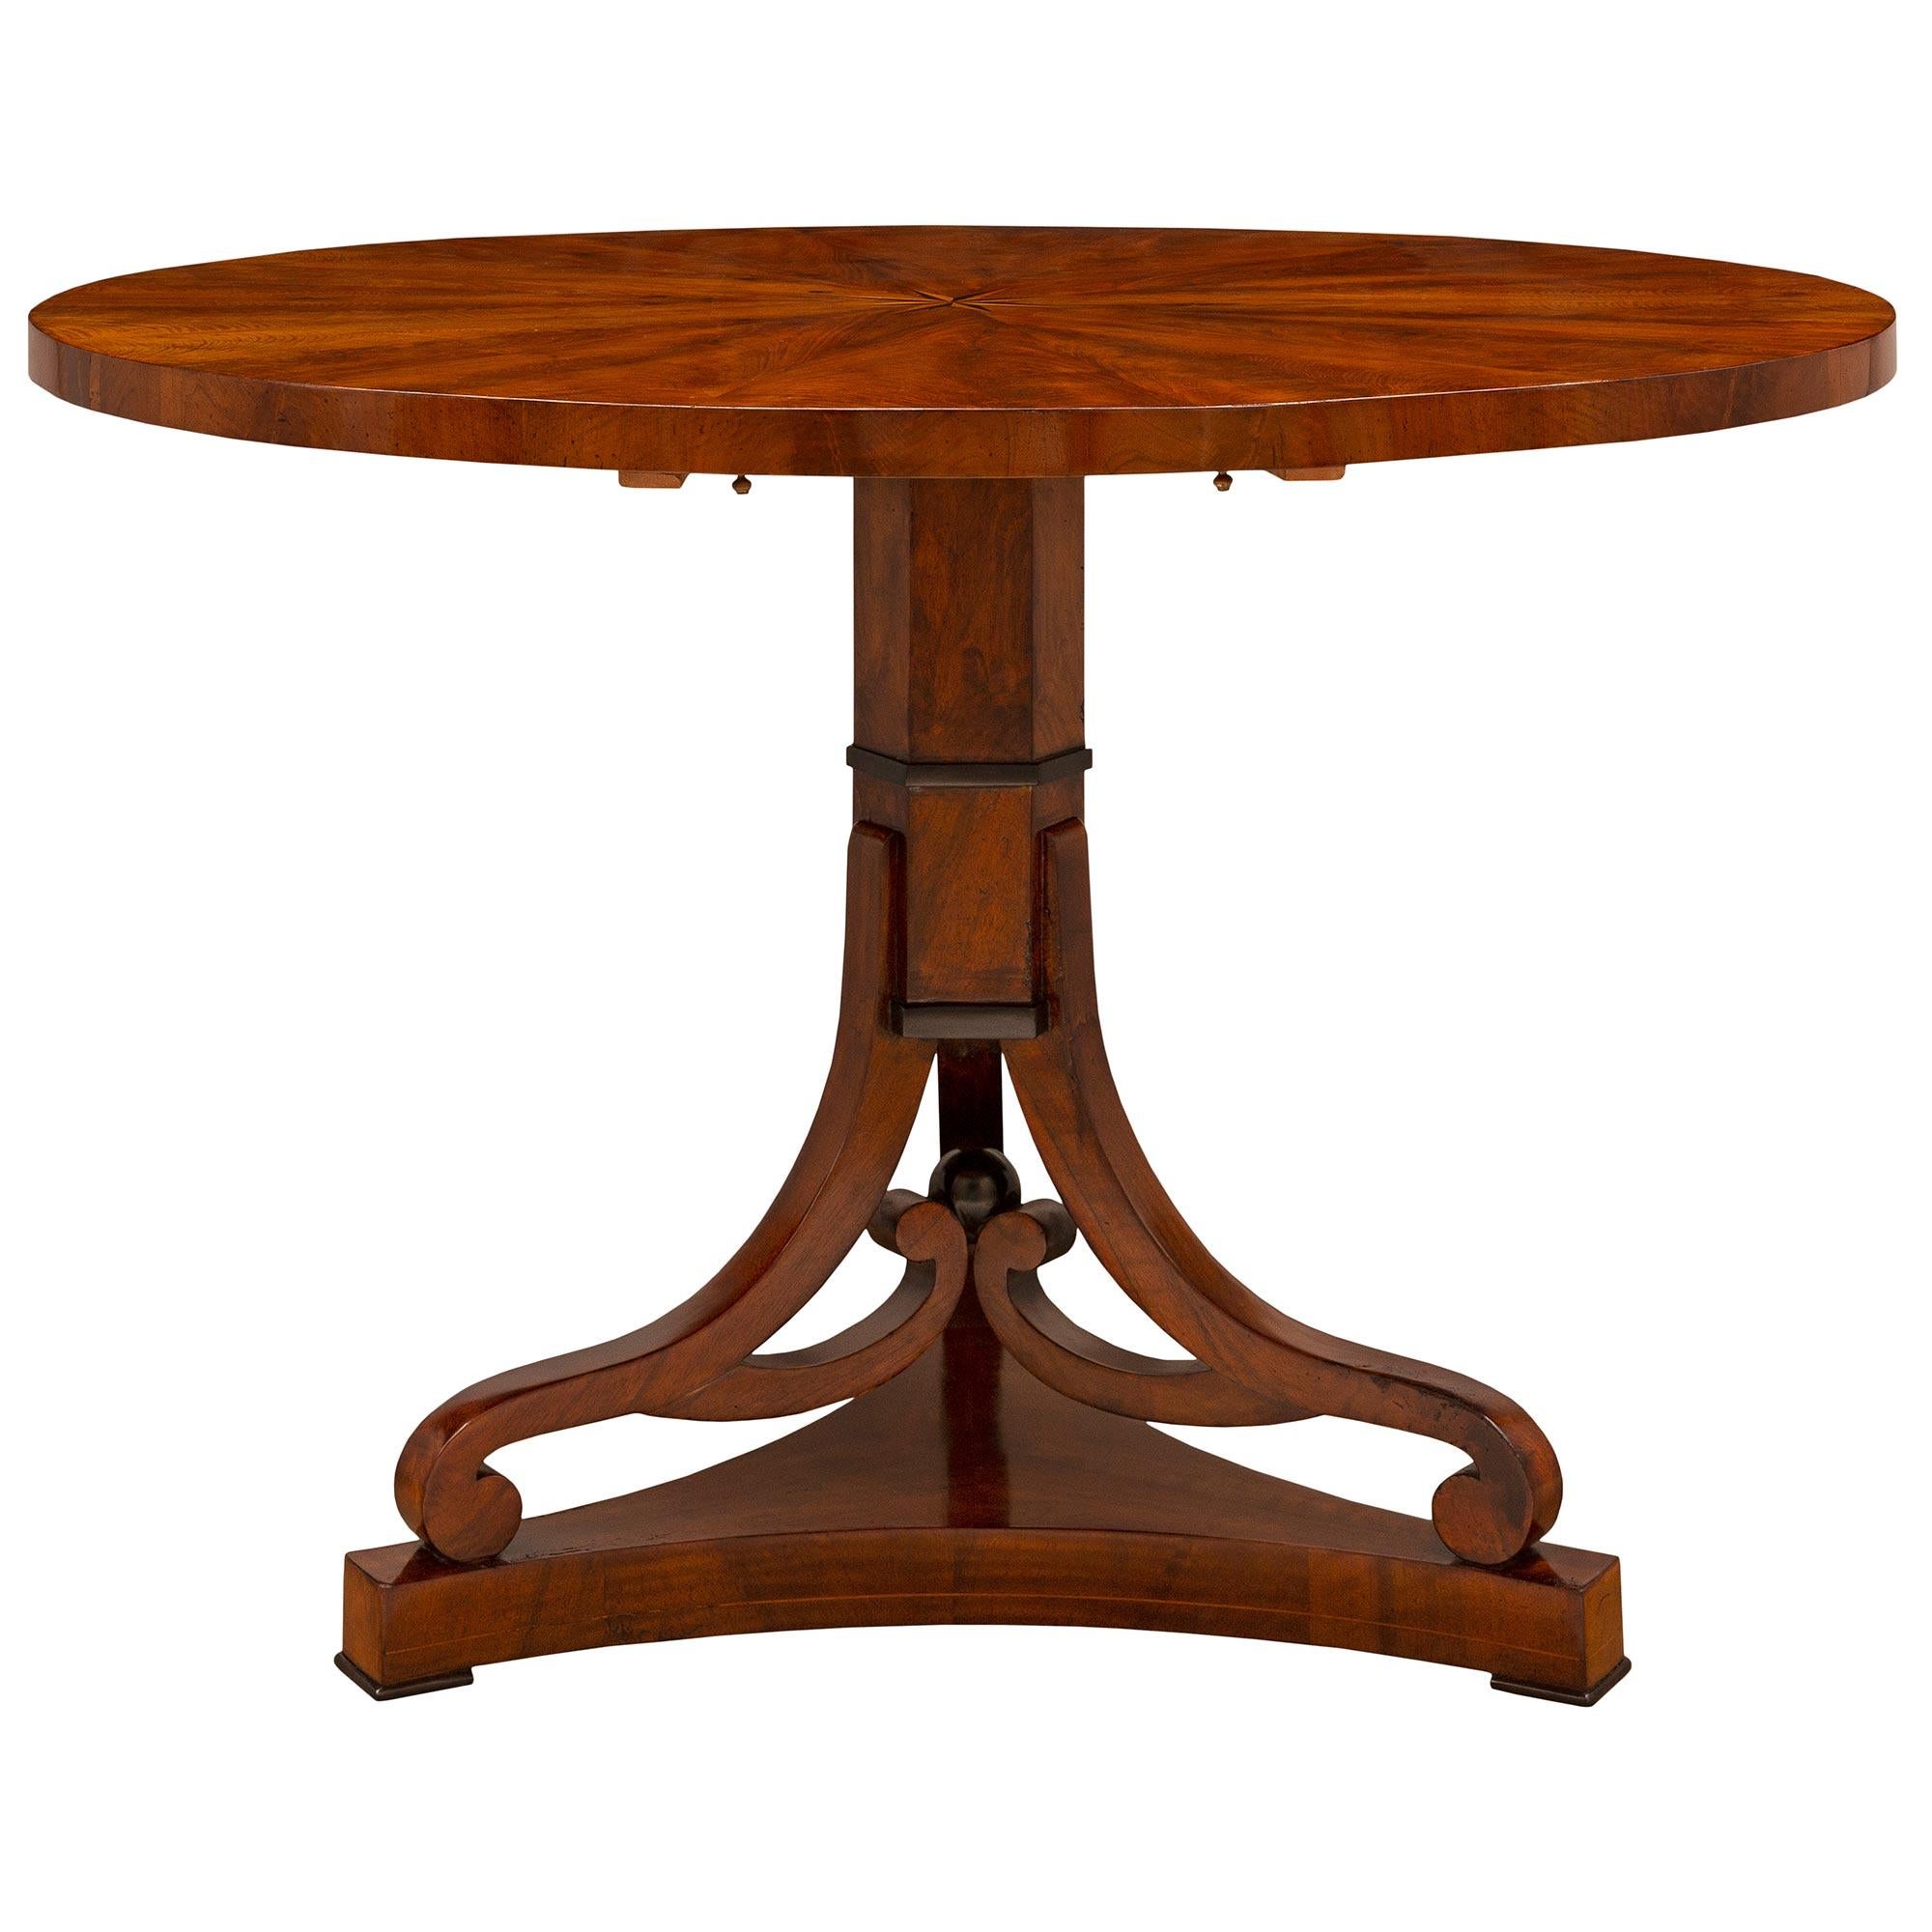 A handsome and most decorative Continental early 19th century Biedermeier st. flamed Mahogany, Fruitwood, and ebonized Fruitwood tilt top center/dining table. The circular table is raised by a beautiful triangular base with fine feet, concave sides,